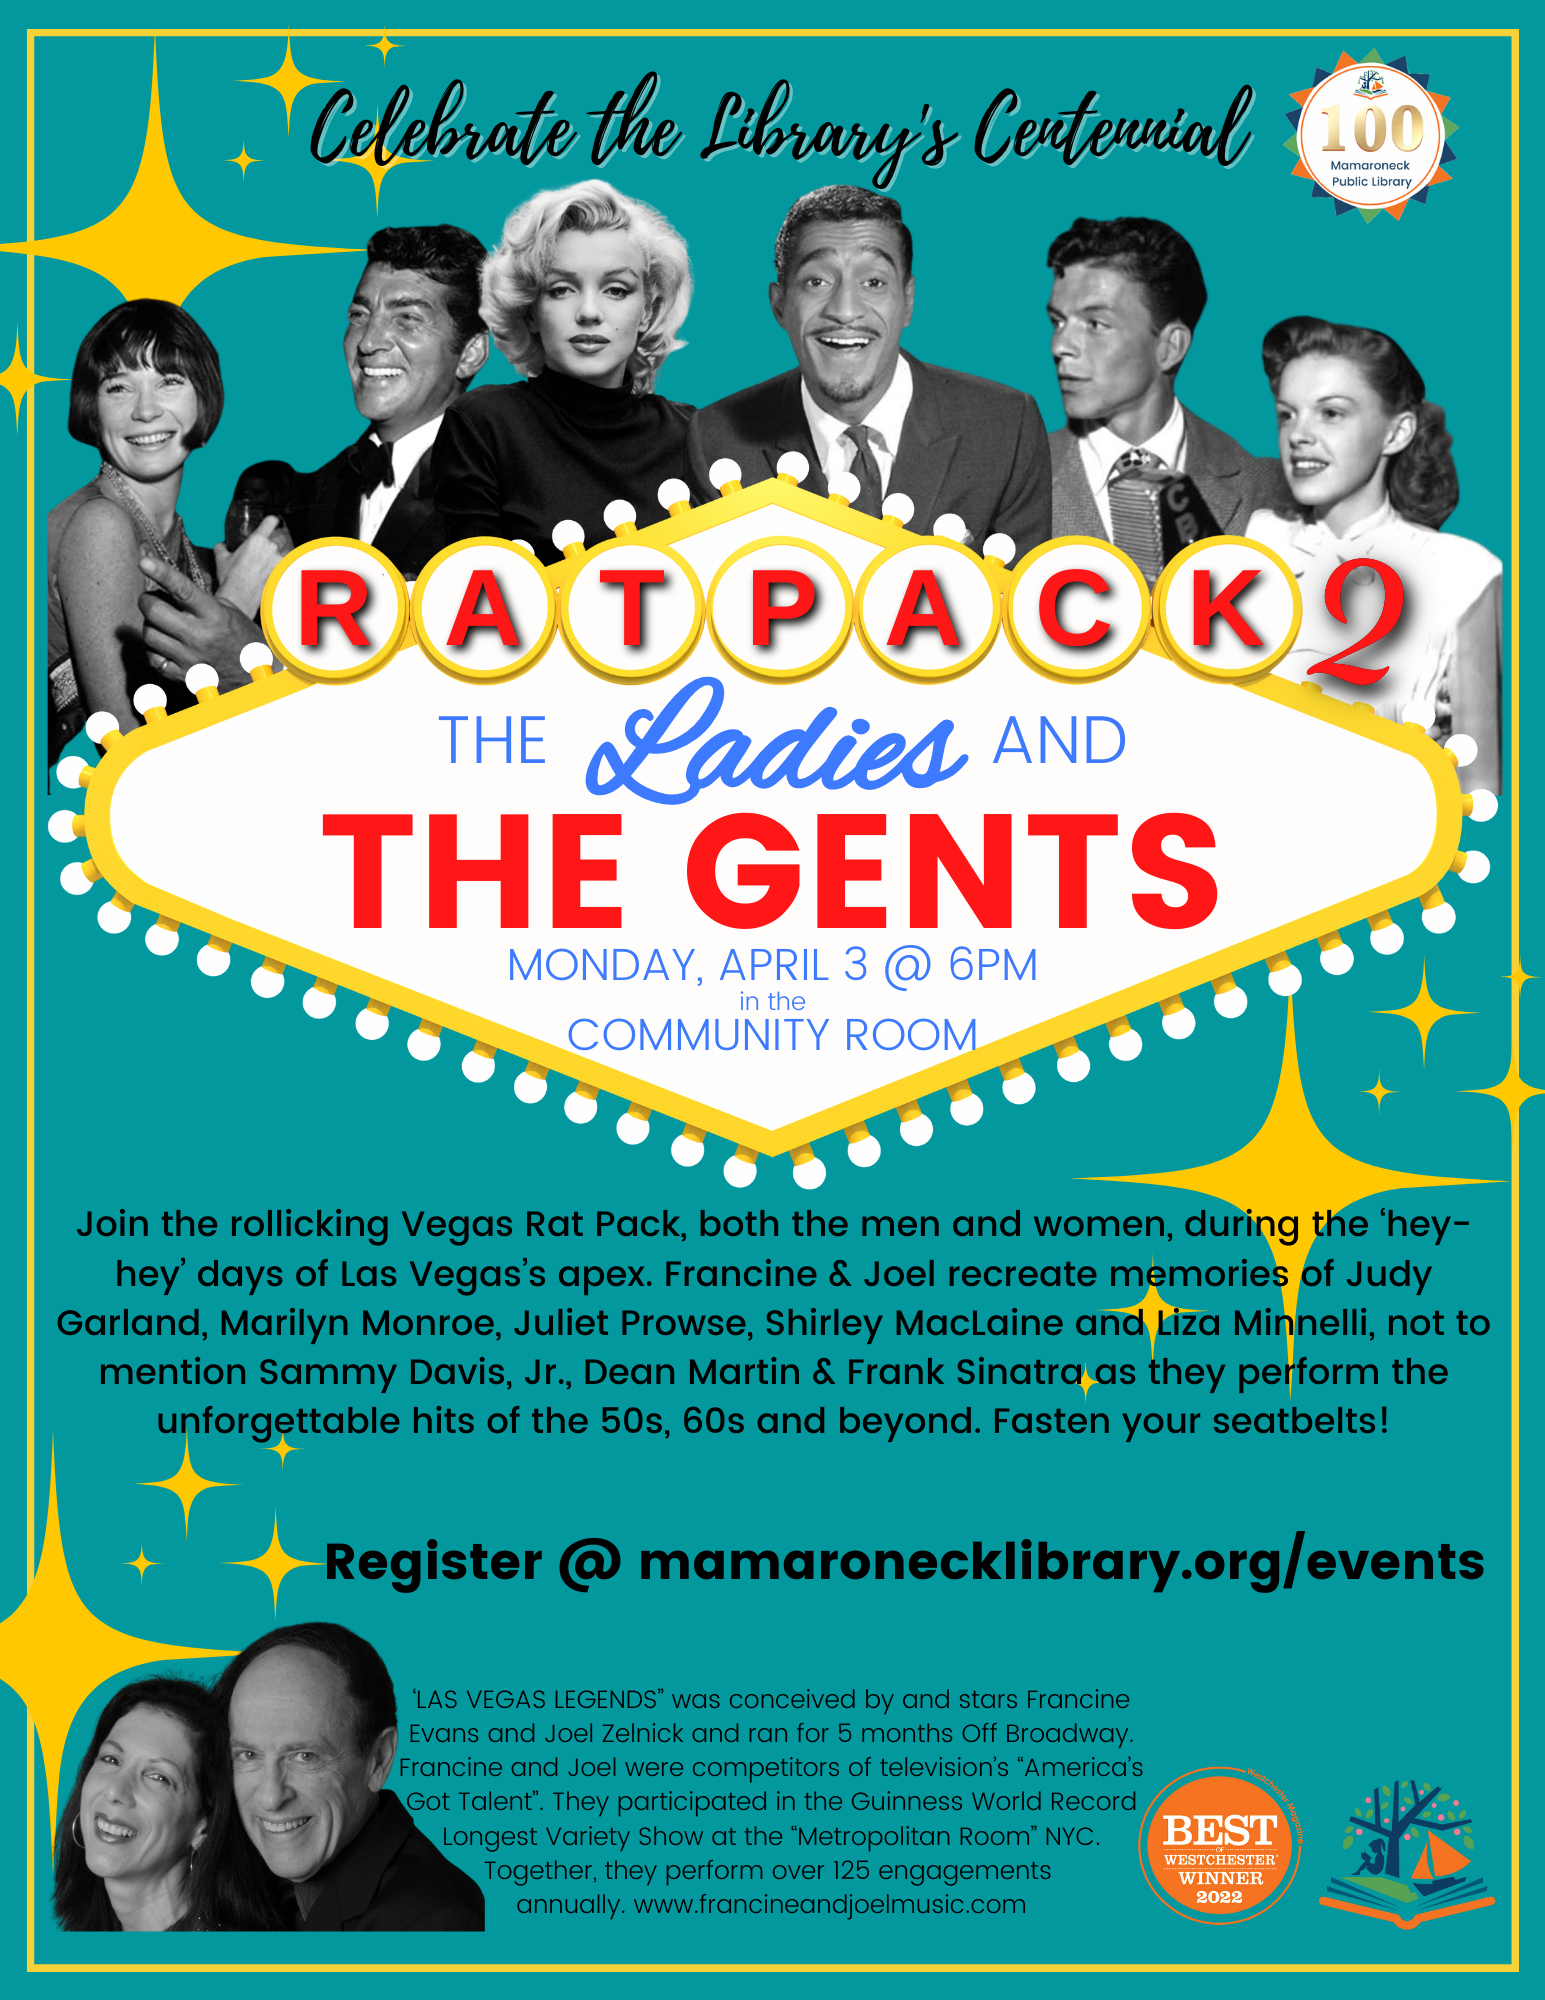 4/3 - Rat Pack 2 @ 6pm in the Community Room